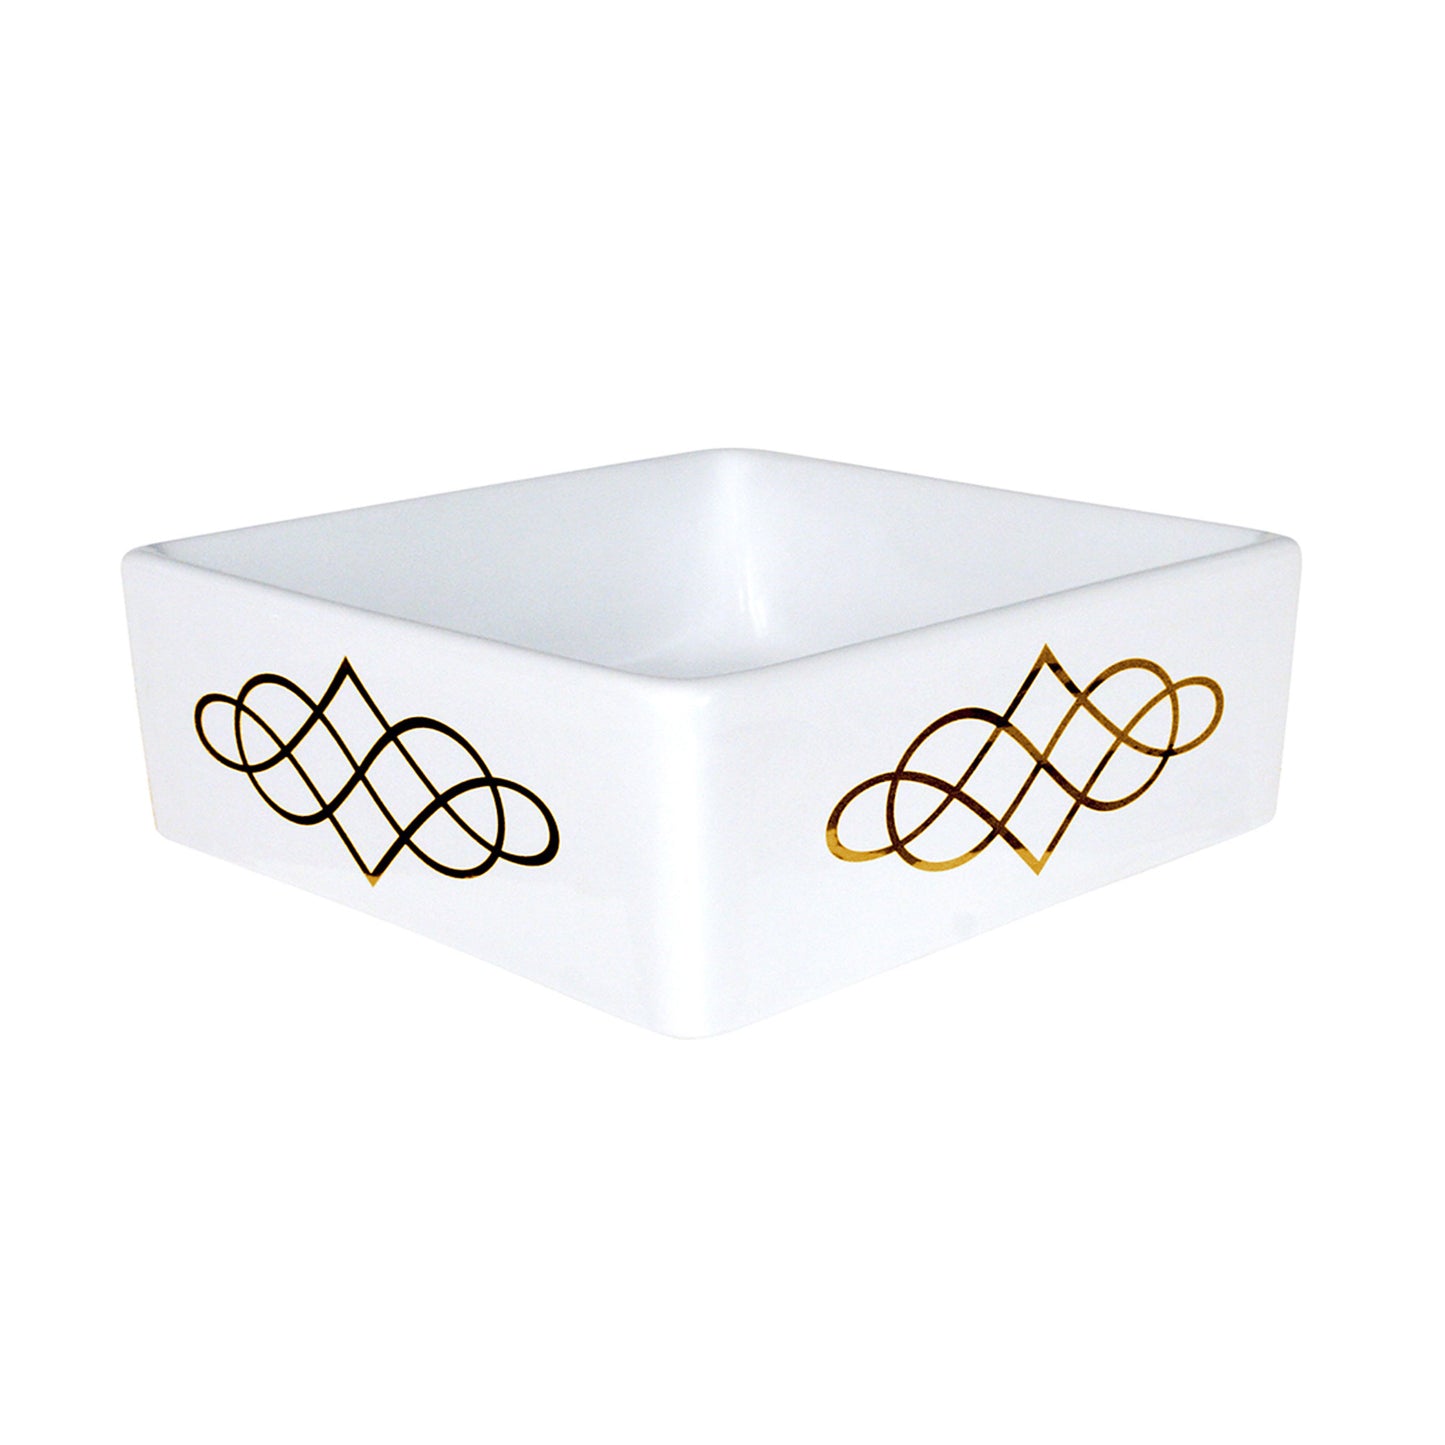 Modern vessel sink painted with gold double swirl design.